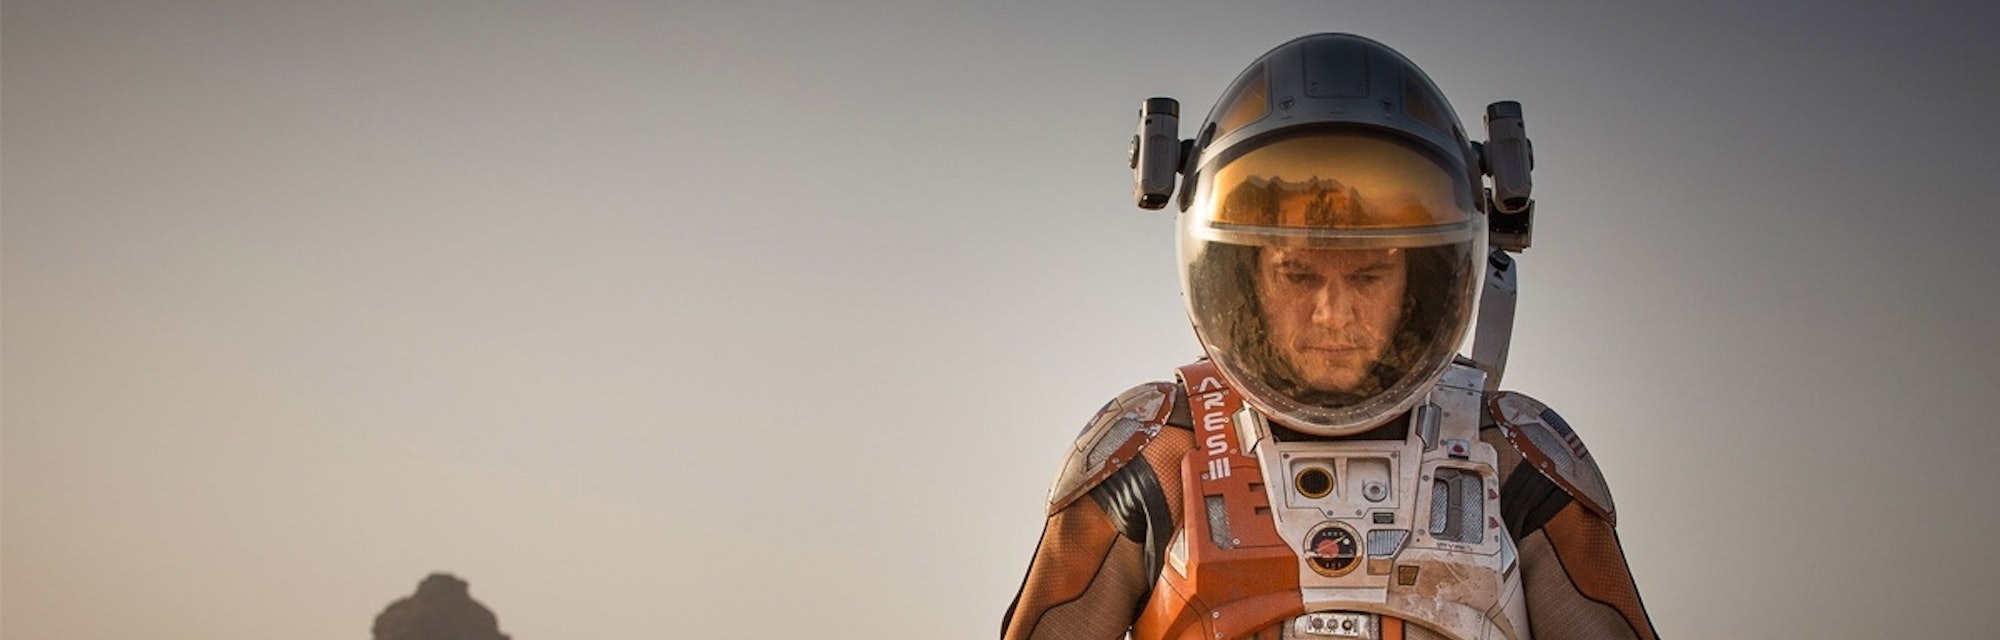 NASA astronaut, Dr. Mark Watney played by Matt Damon, as he’s stranded on the Red Planet in ‘The Mar...